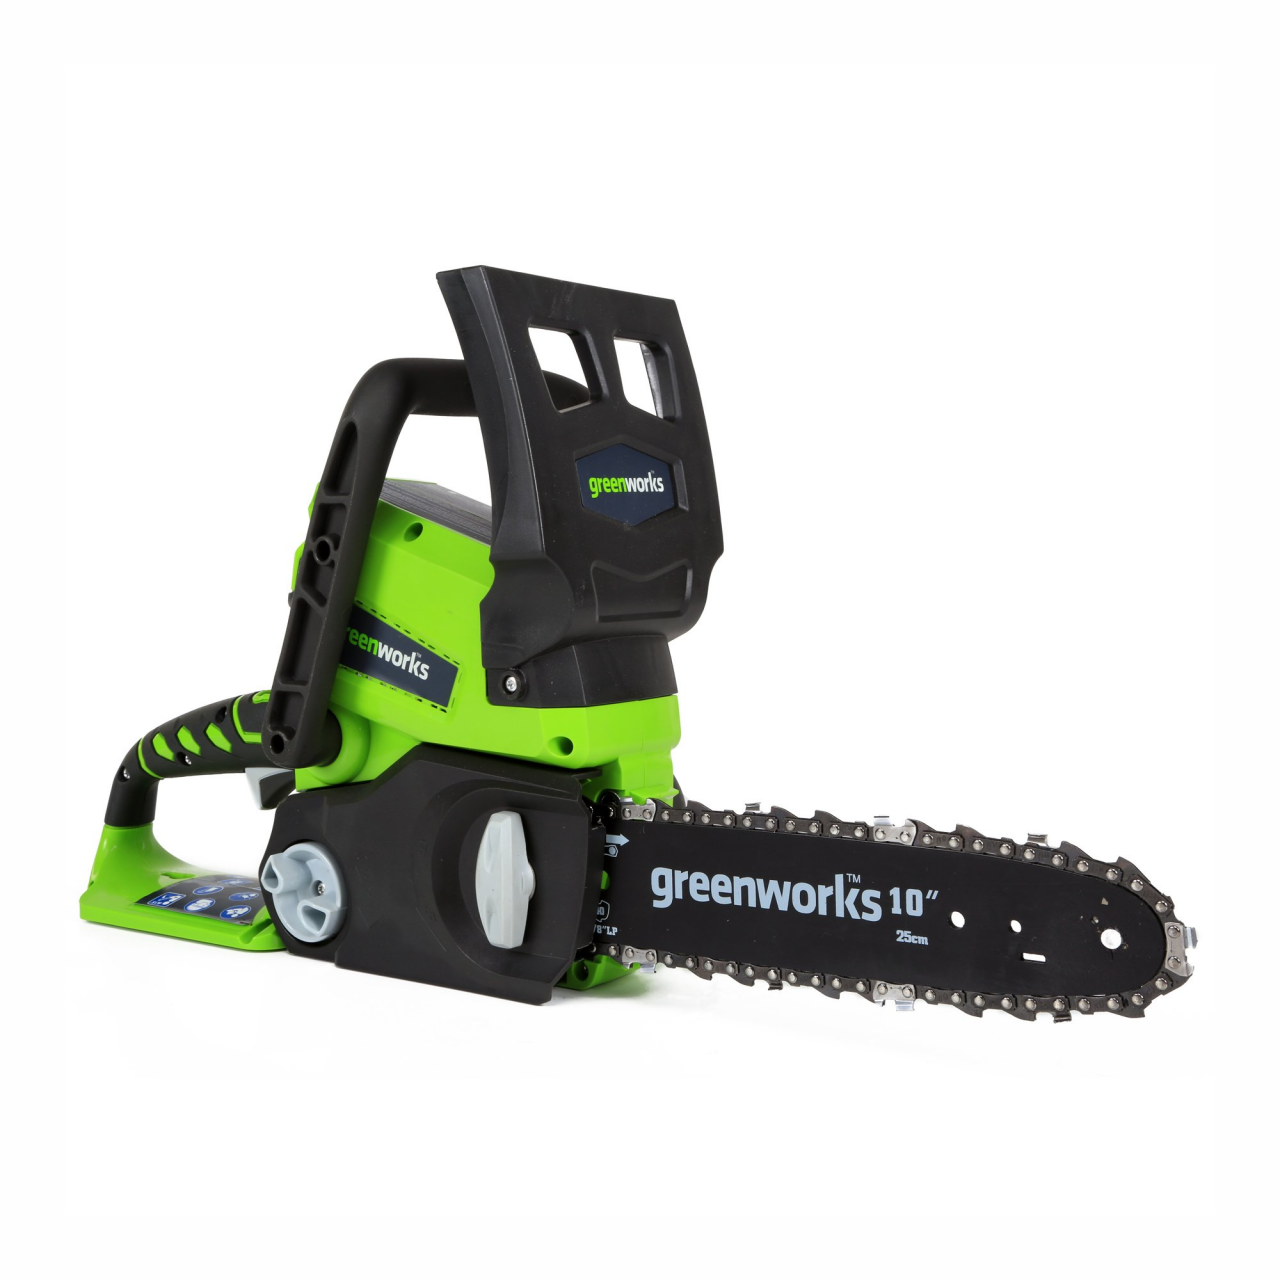 Greenworks 24V 10 inch cordless chainsaw, 2.0 AH battery and charger  Included